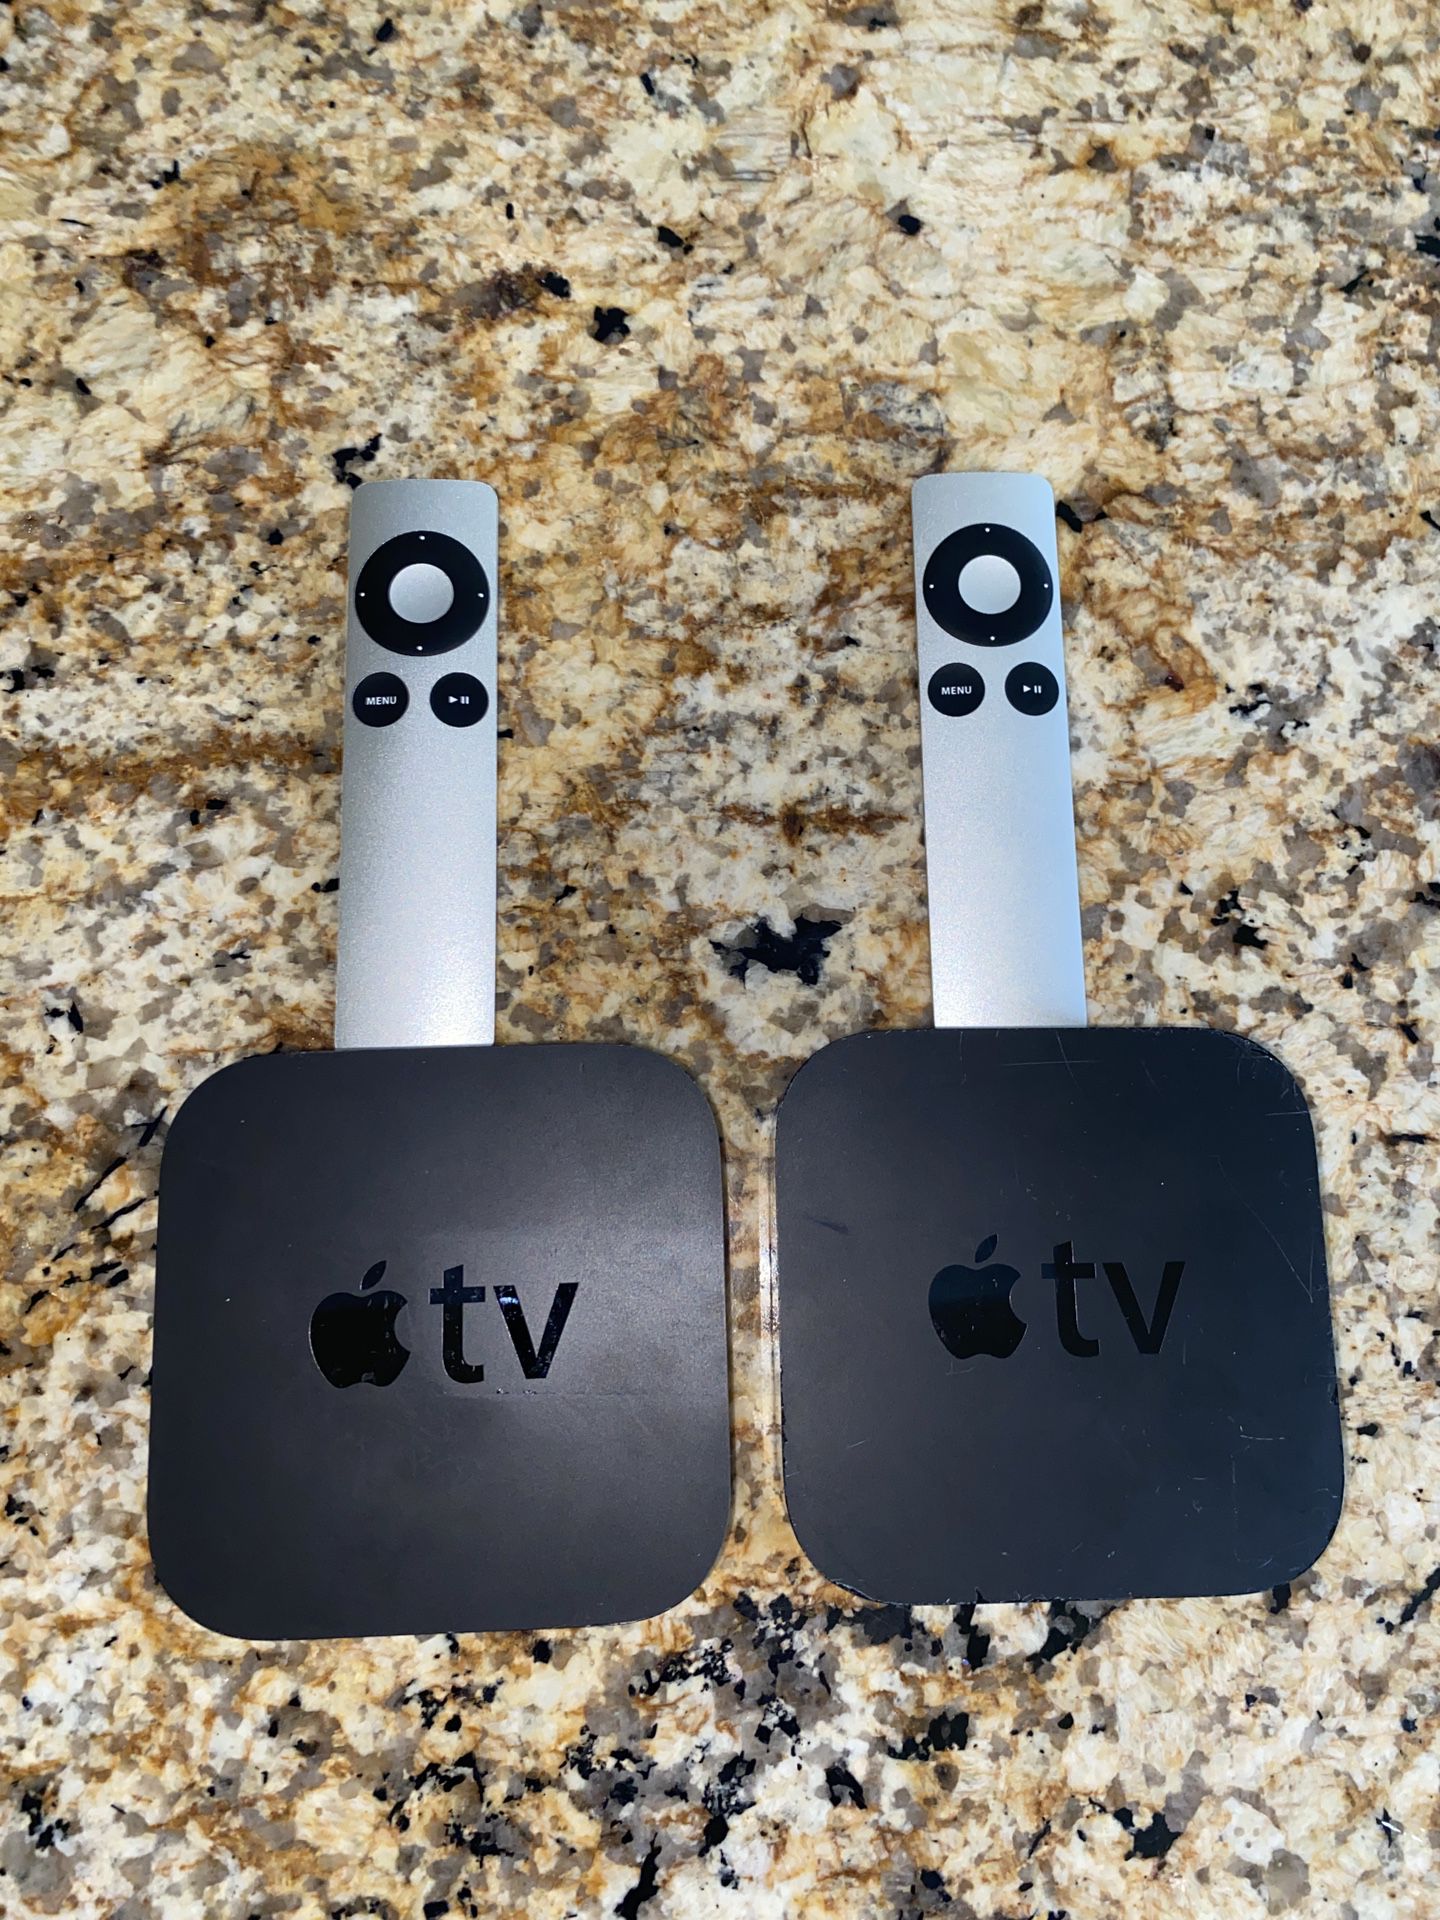 Two Apple Tv A1469, Two Remotes, One Charger